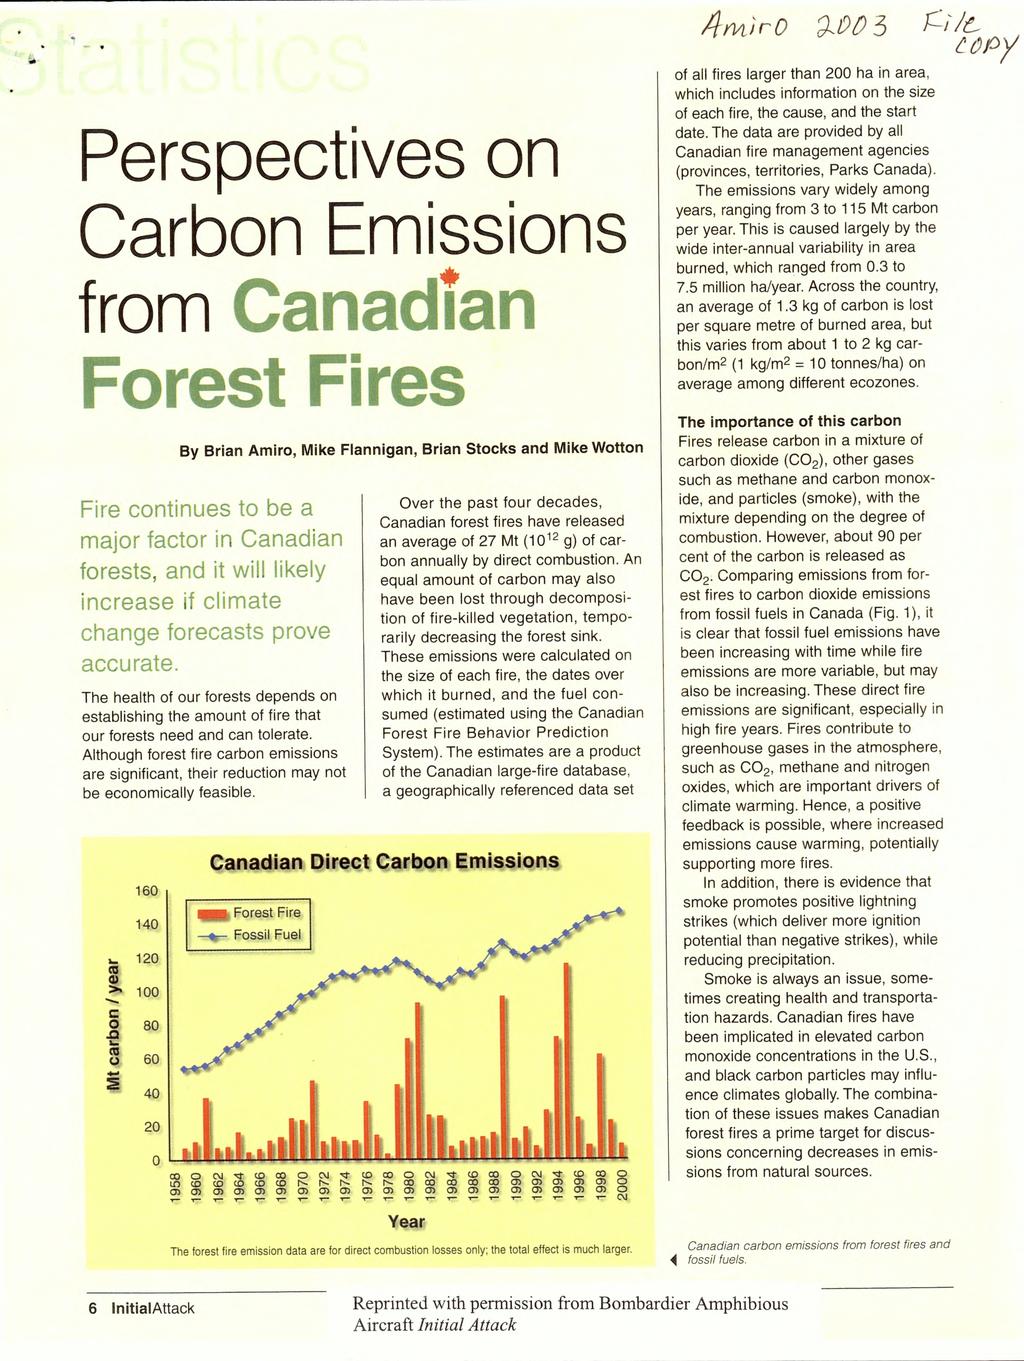 Perspectives on Carbon Emissions from uanadian arest Fire a) c 0 5 160 140 120 100 80 60 40 20 0 By Brian Amiro, Mike Flannigan, Brian Stocks and Mike Wotton Fire continues to be a major factor in